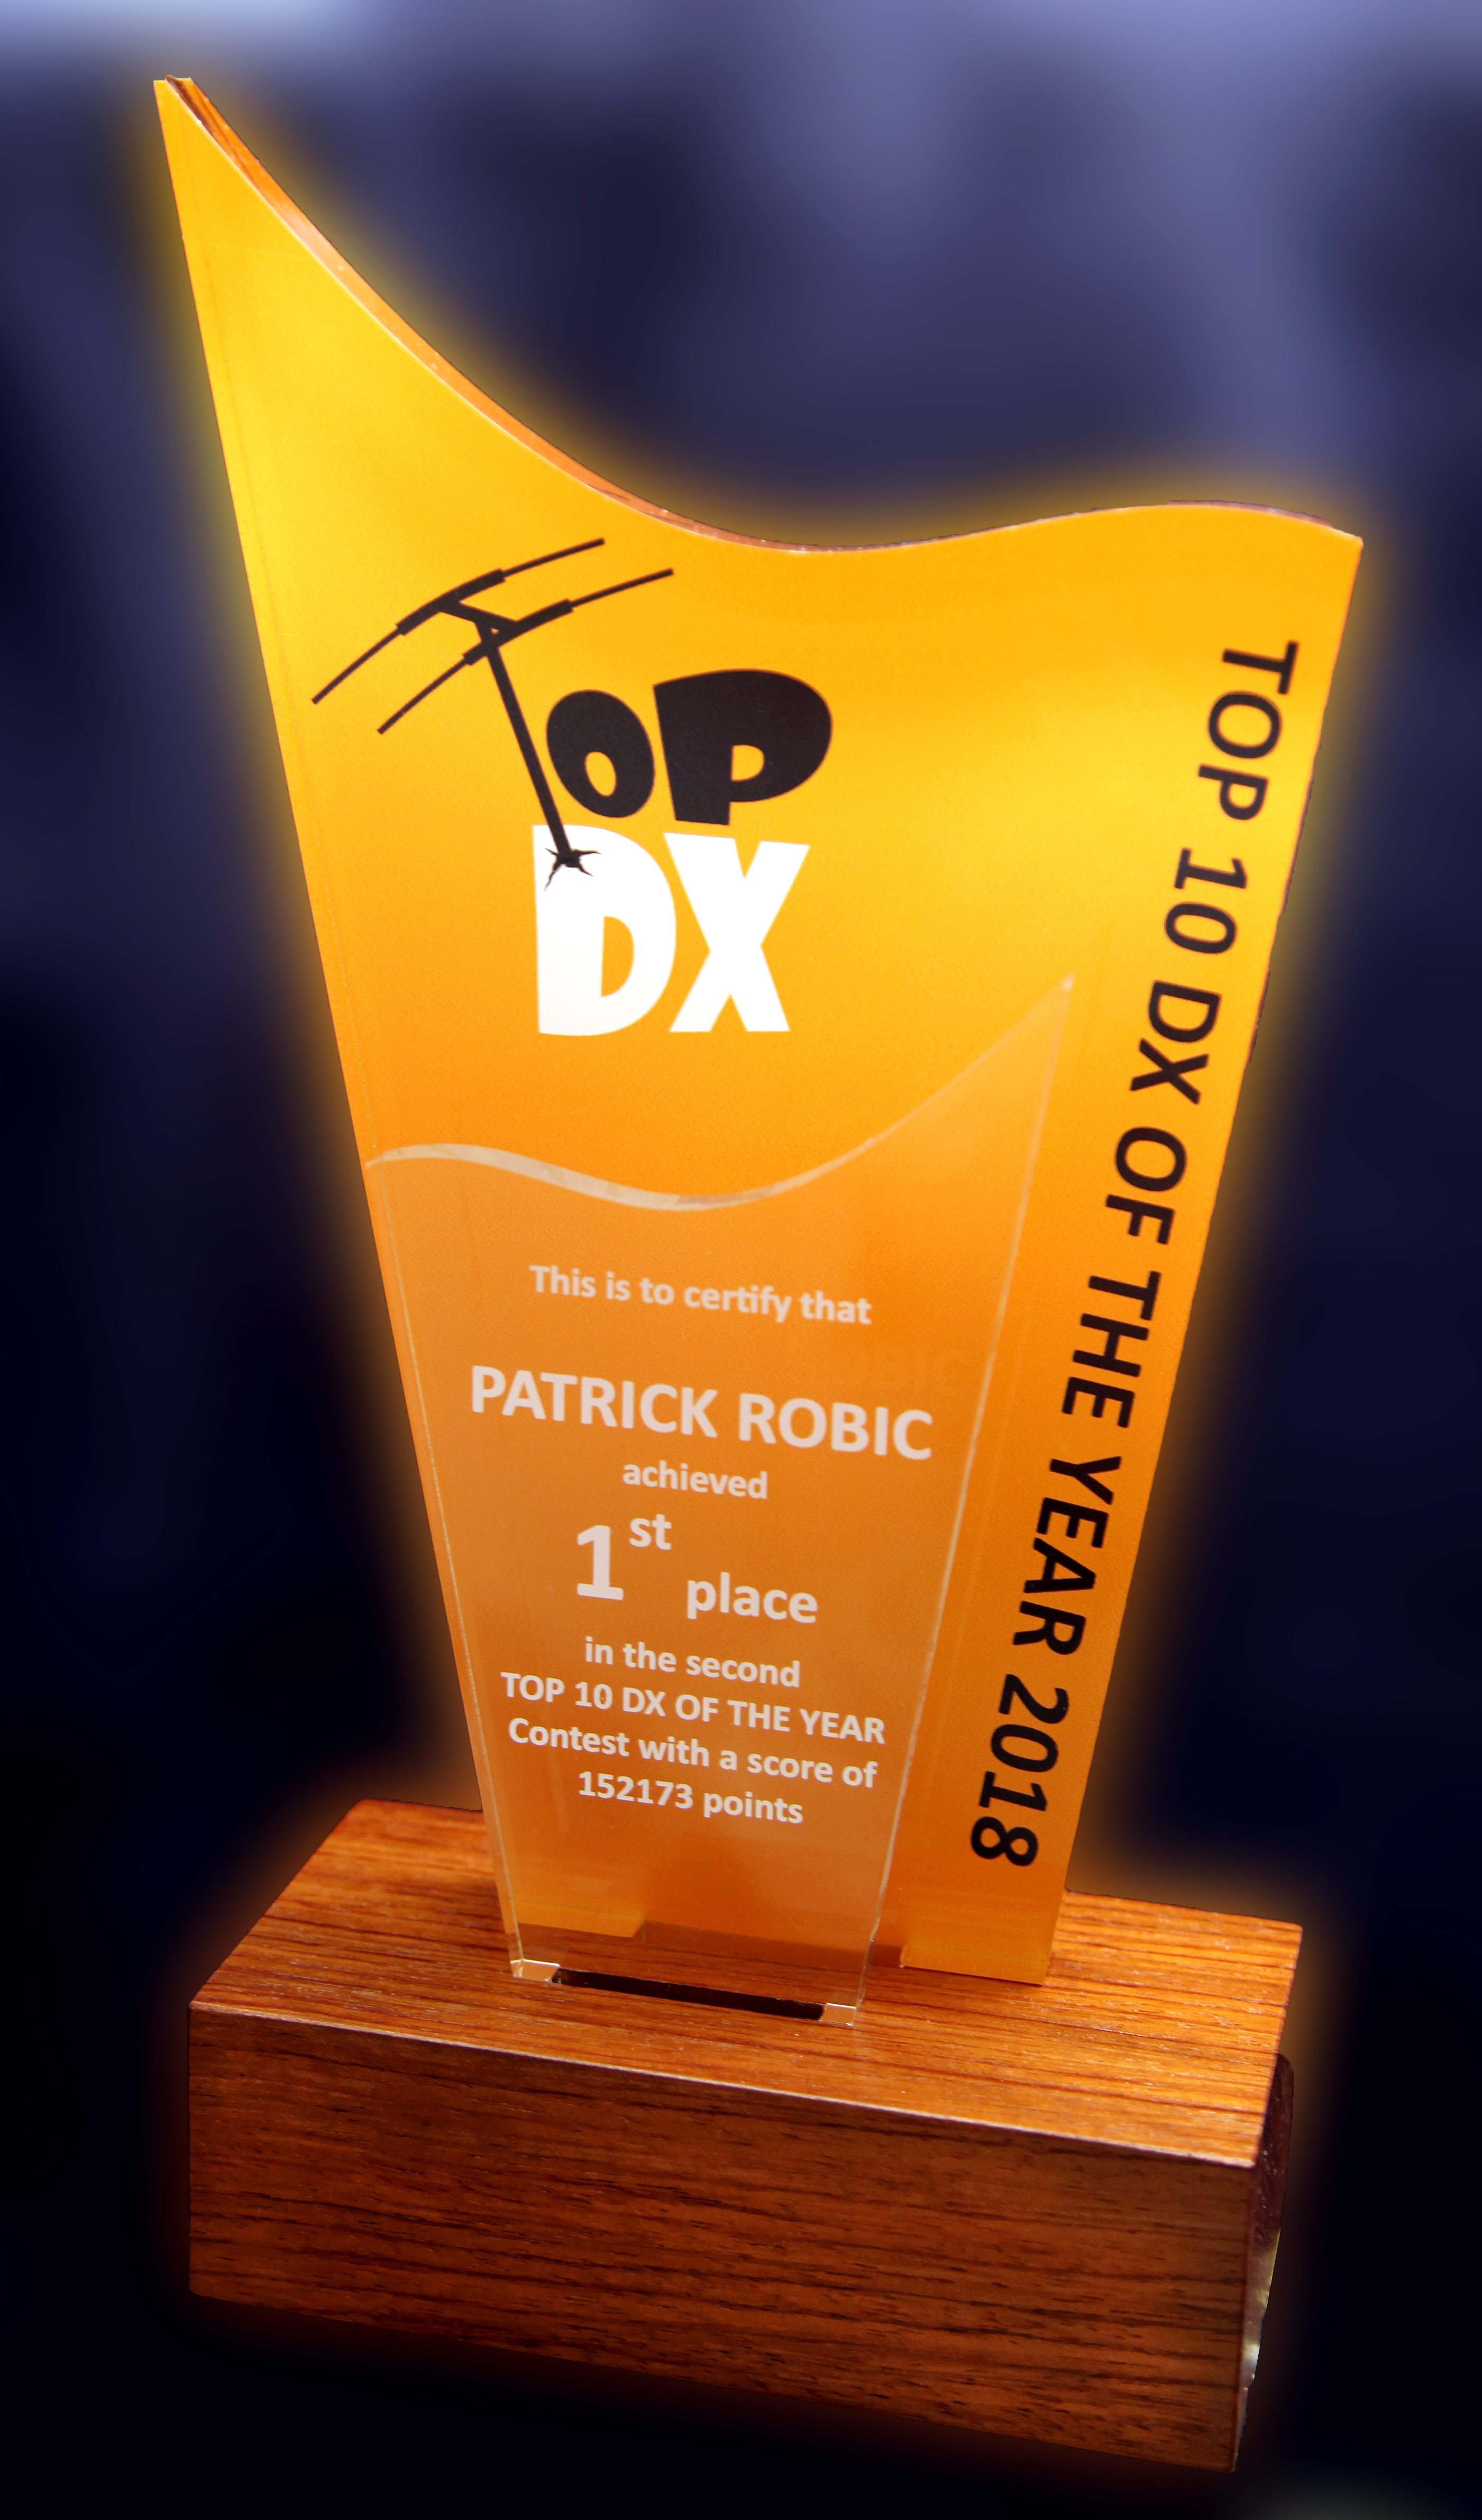 TOP 10 DX OF THE YEAR 2018 TROPHY